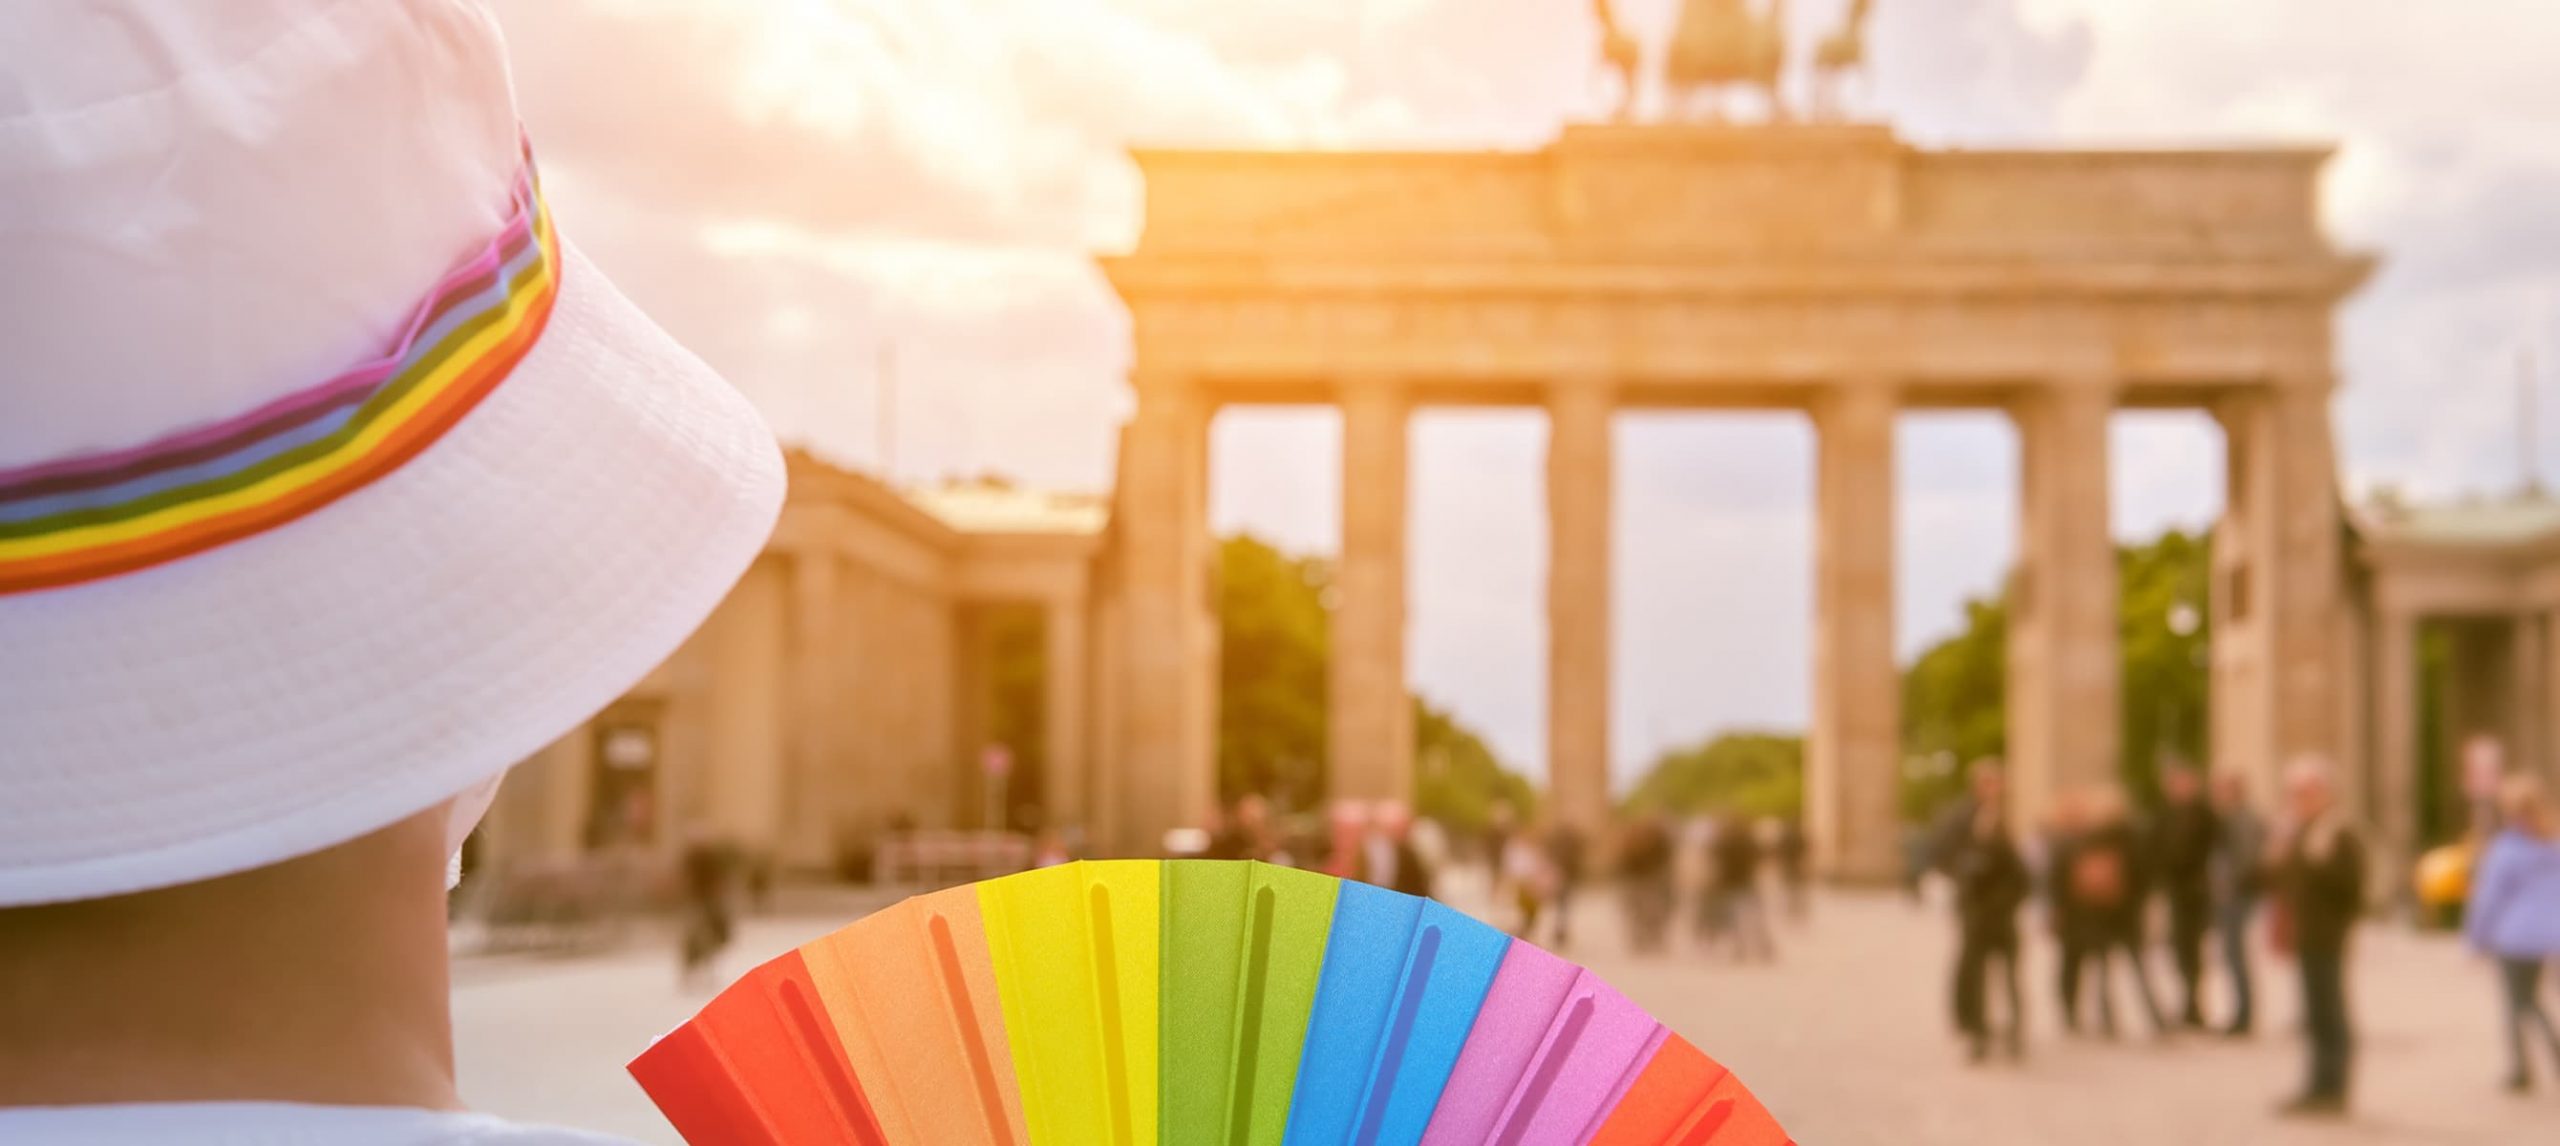 Berlin LGBT nightlife: best gay bars, clubs and parties - Hostelworld